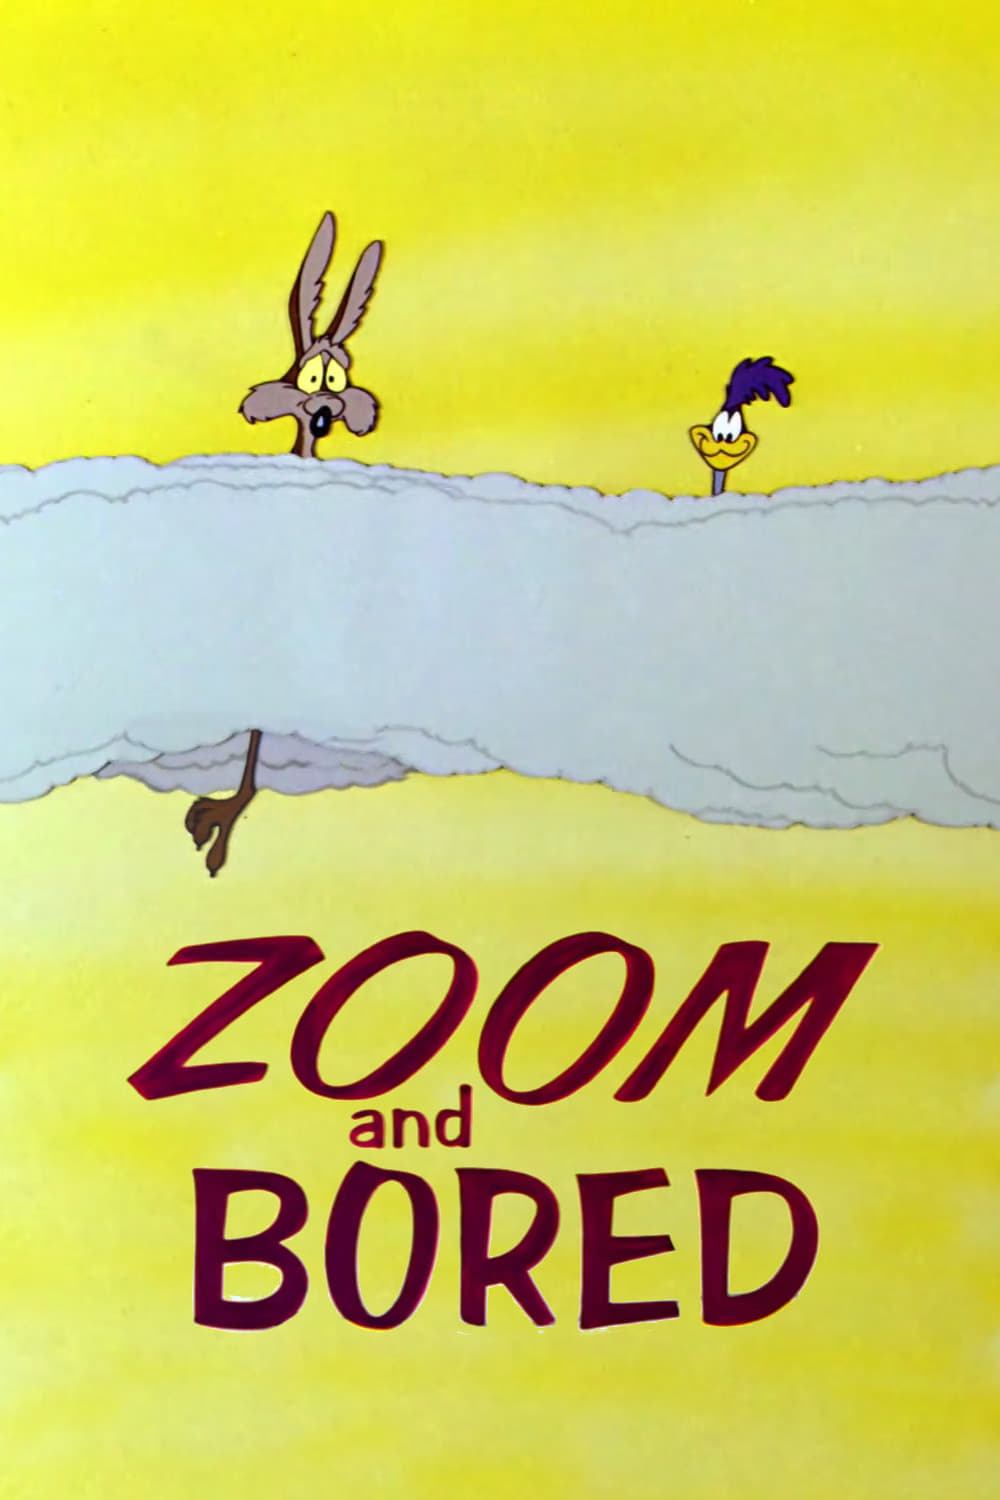 Zoom and Bored (1957)